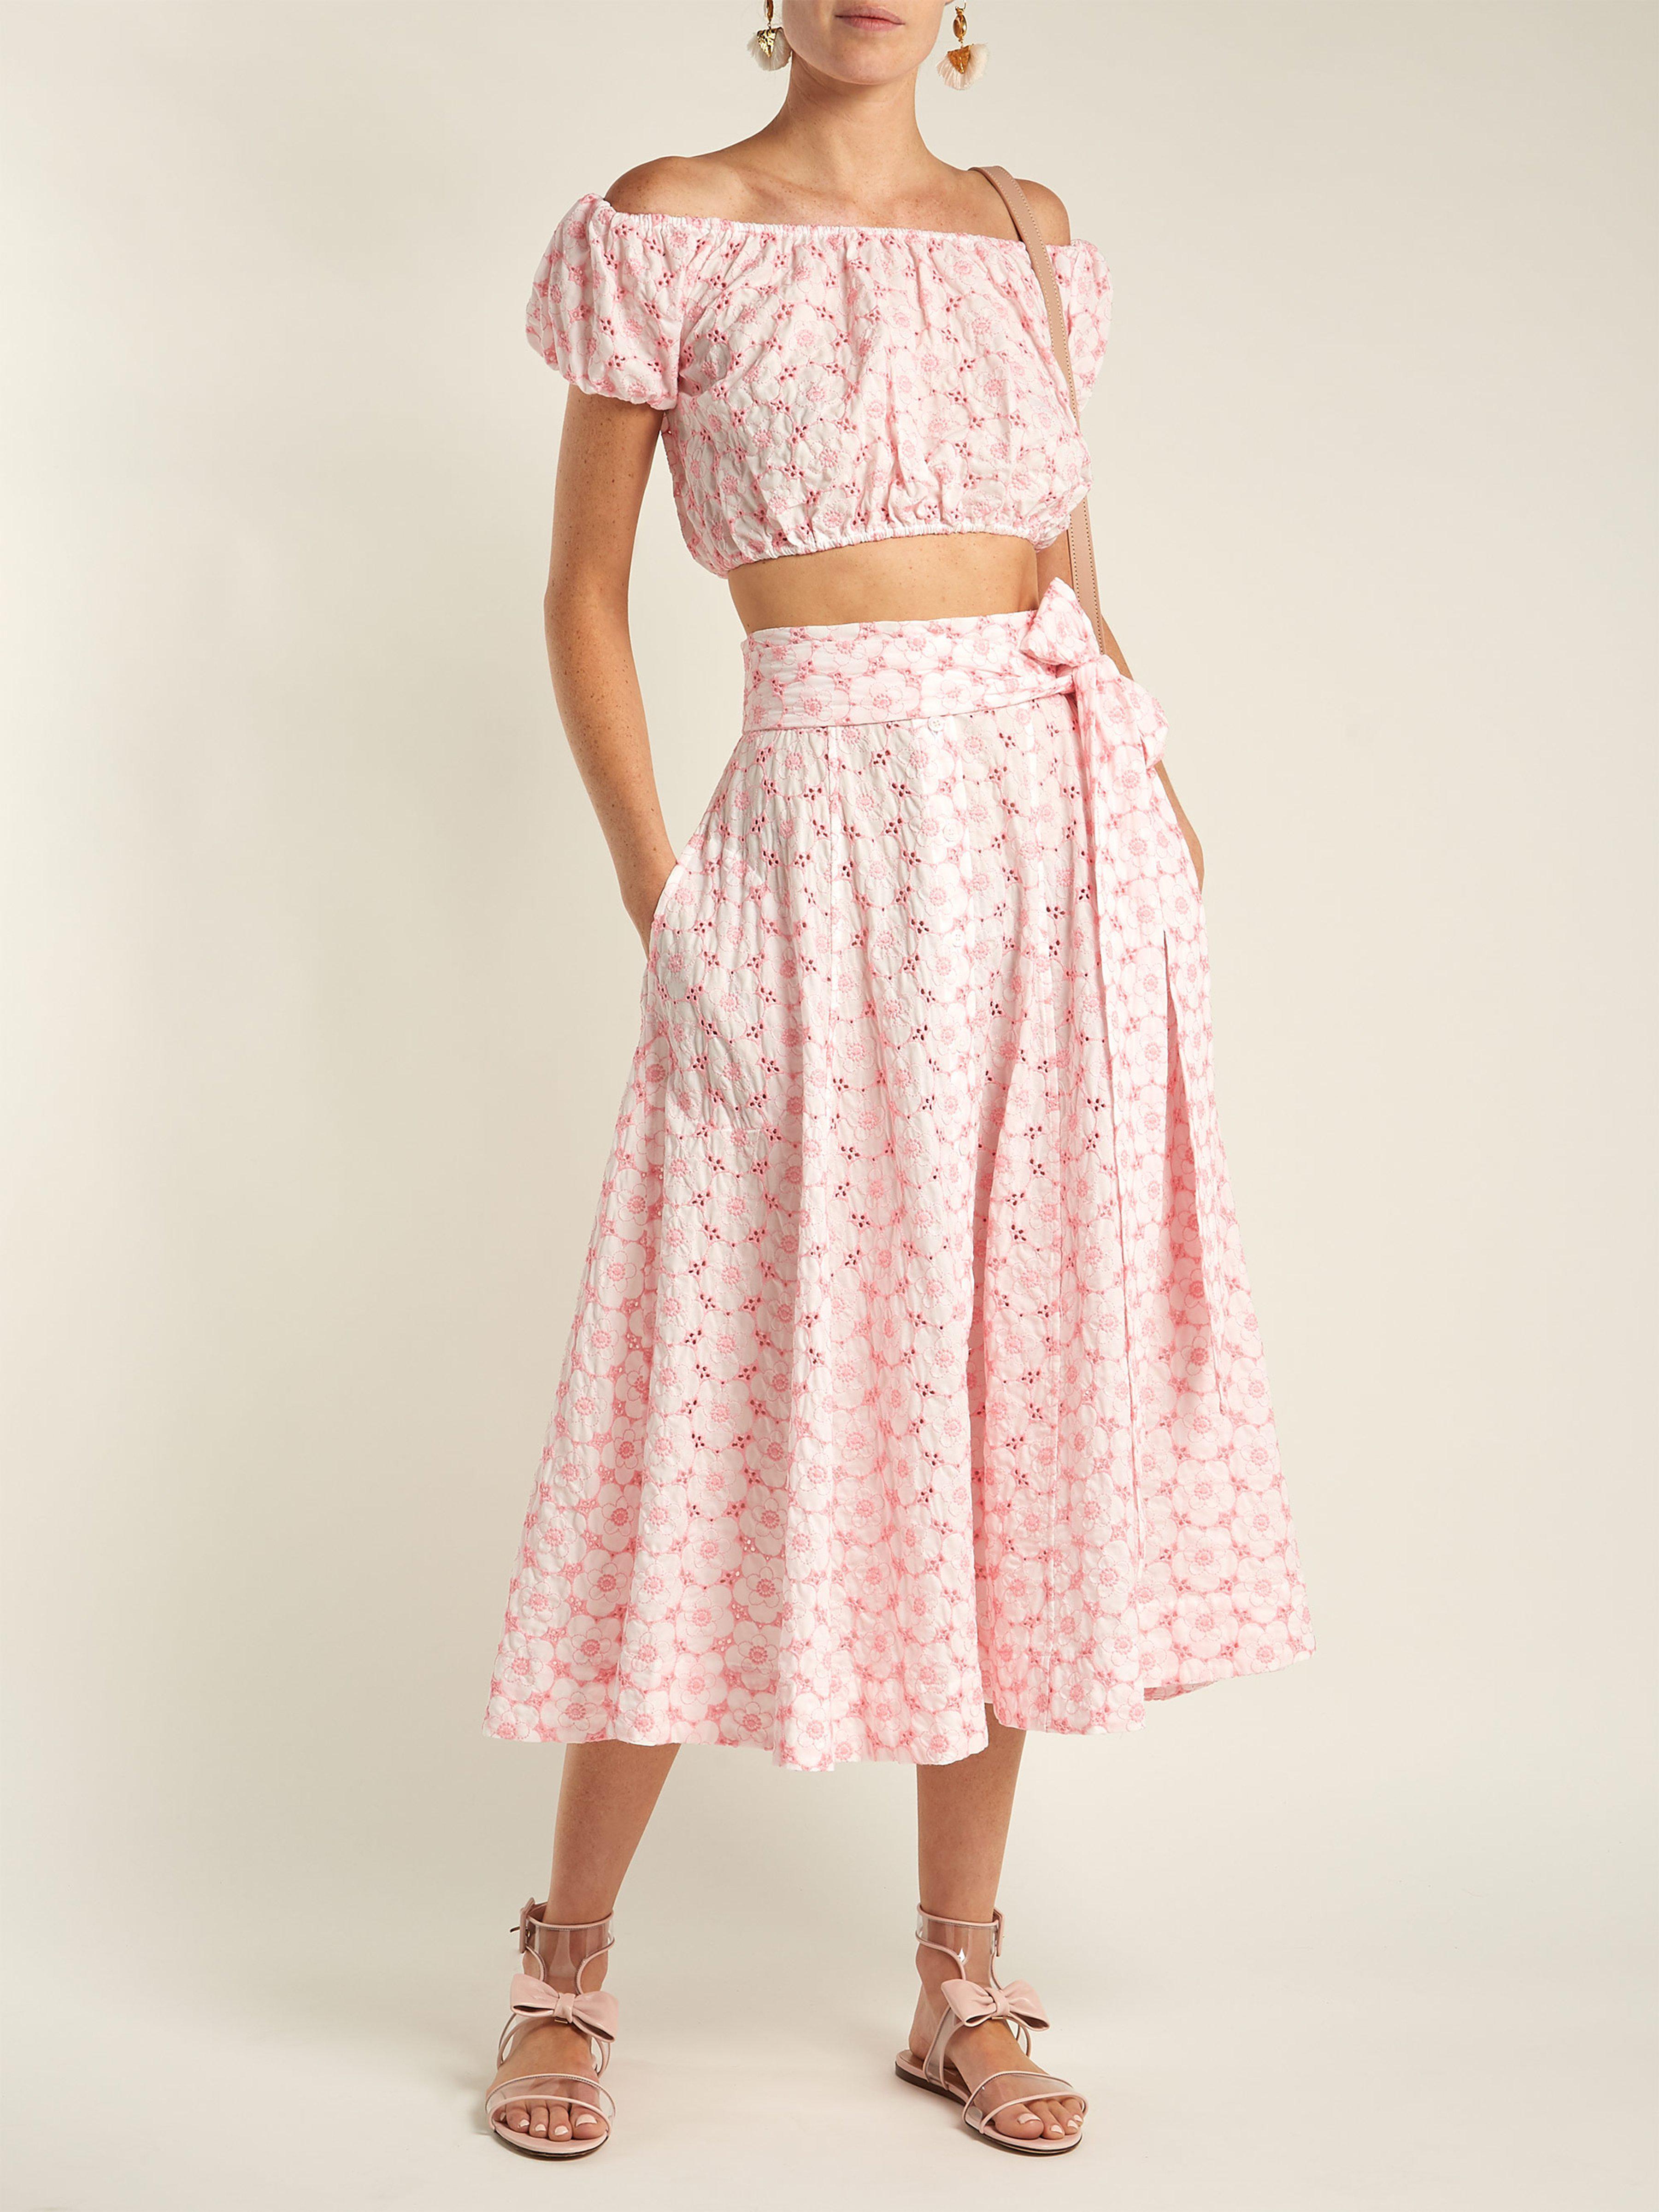 Lisa Marie Fernandez Embroidered Eyelet Cotton Midi Skirt in Pink - Lyst